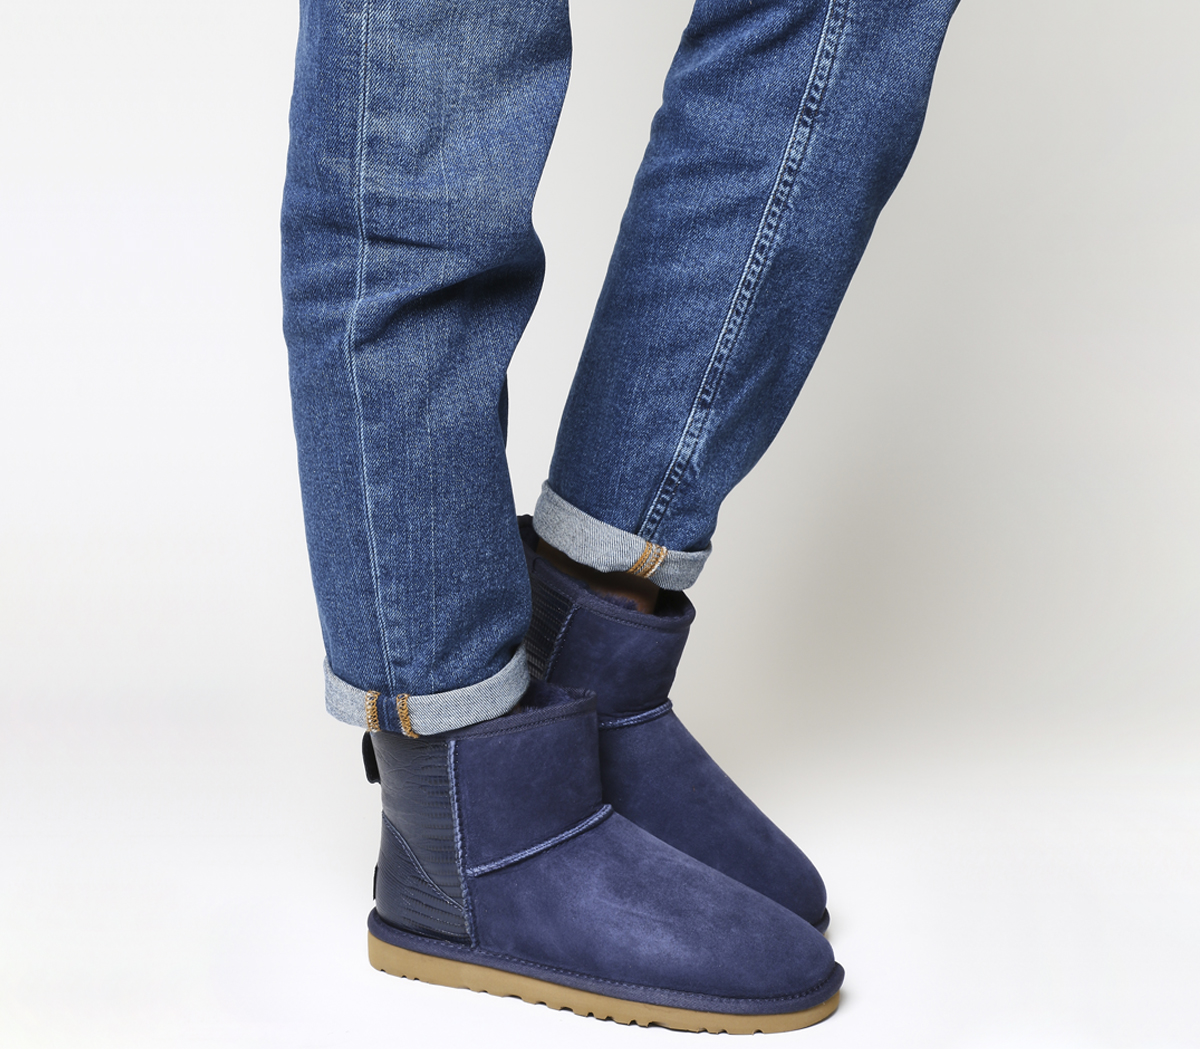 navy blue ugg style boots